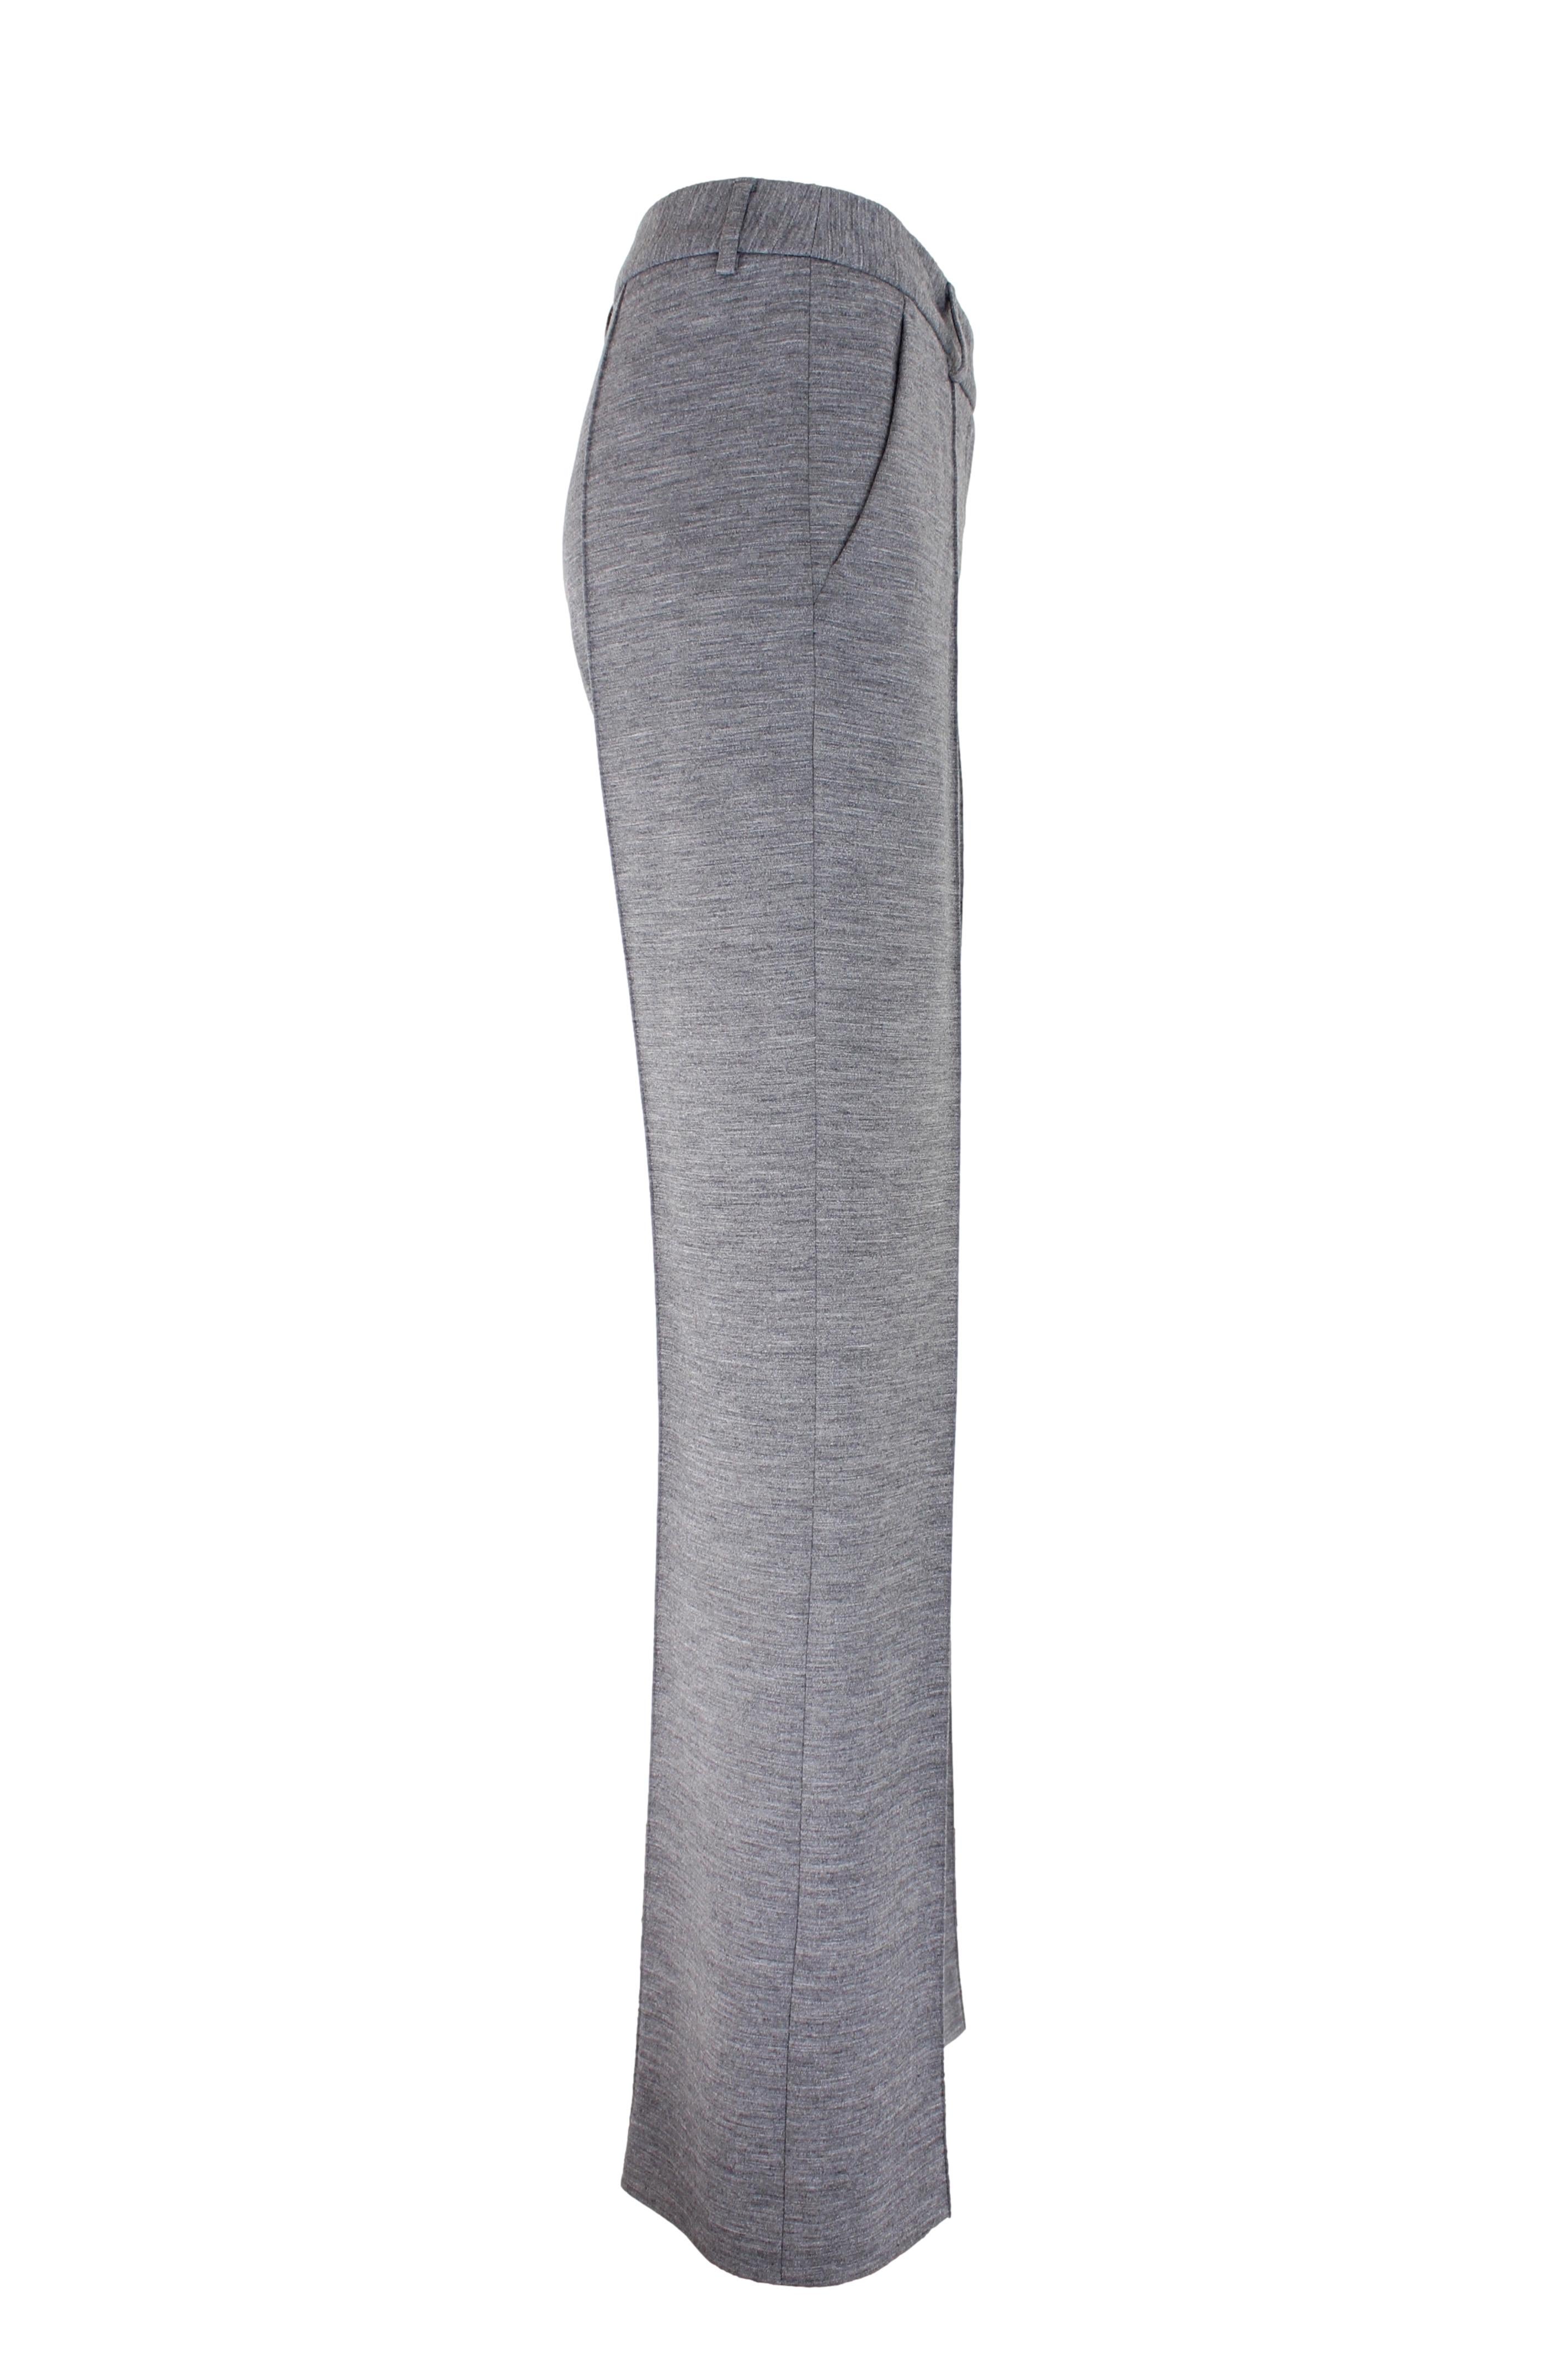 Moschino Cheap and Chic Gray Wool Palazzo Trousers In Excellent Condition For Sale In Brindisi, Bt